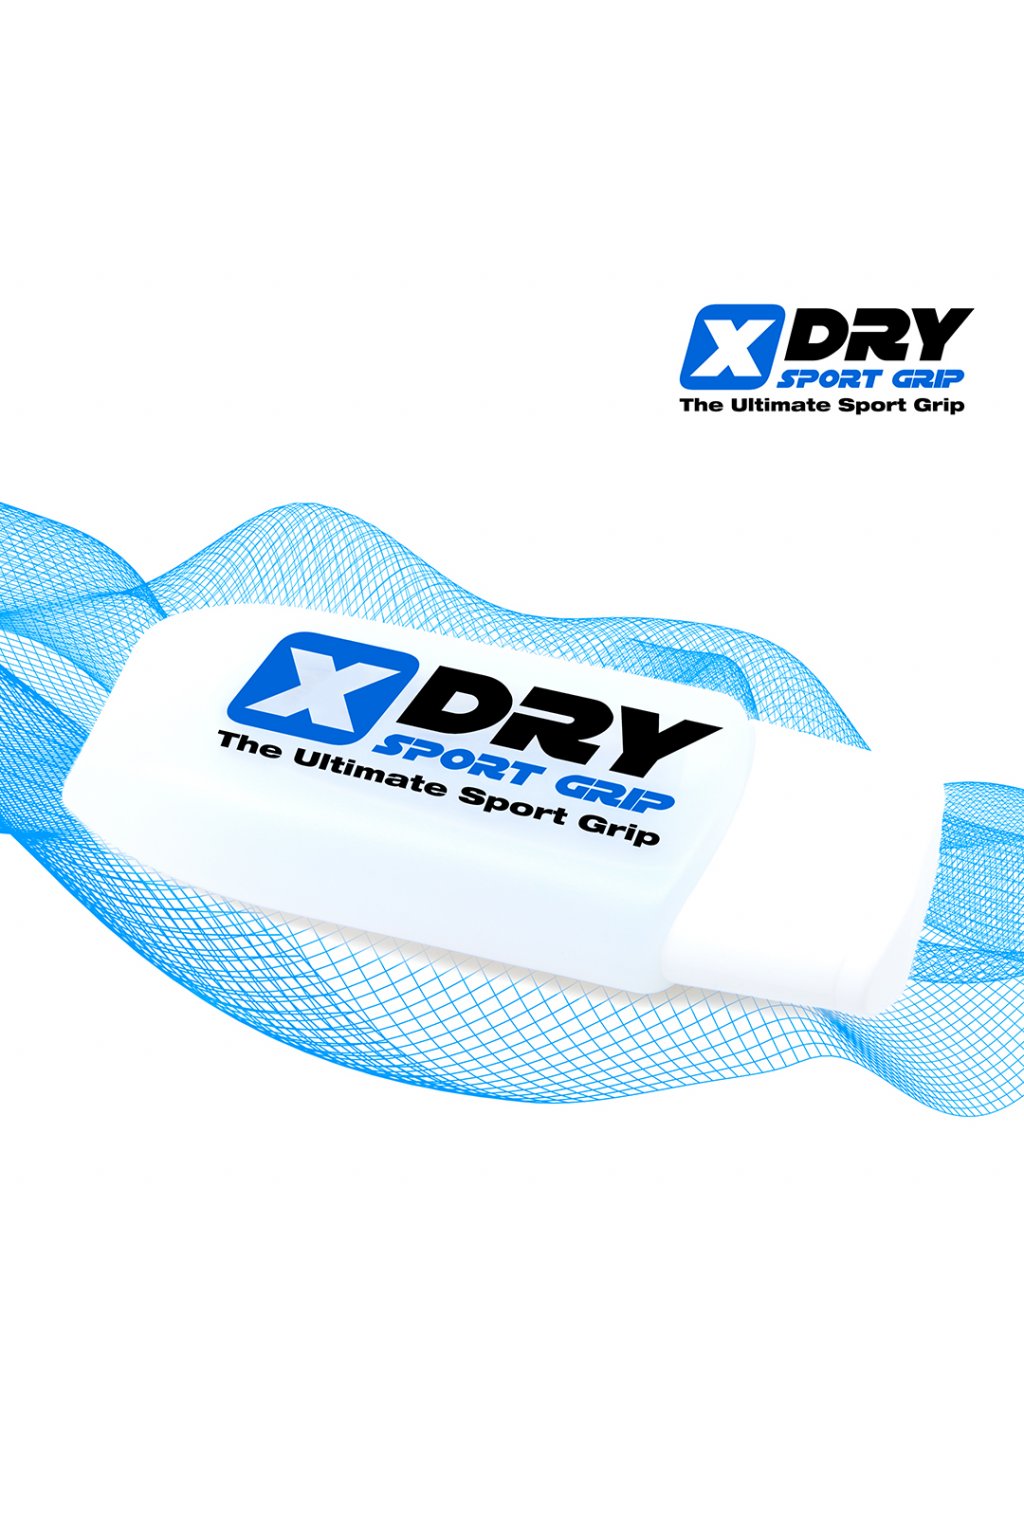 New X dry transparent packaging with webbing 1080x1080px